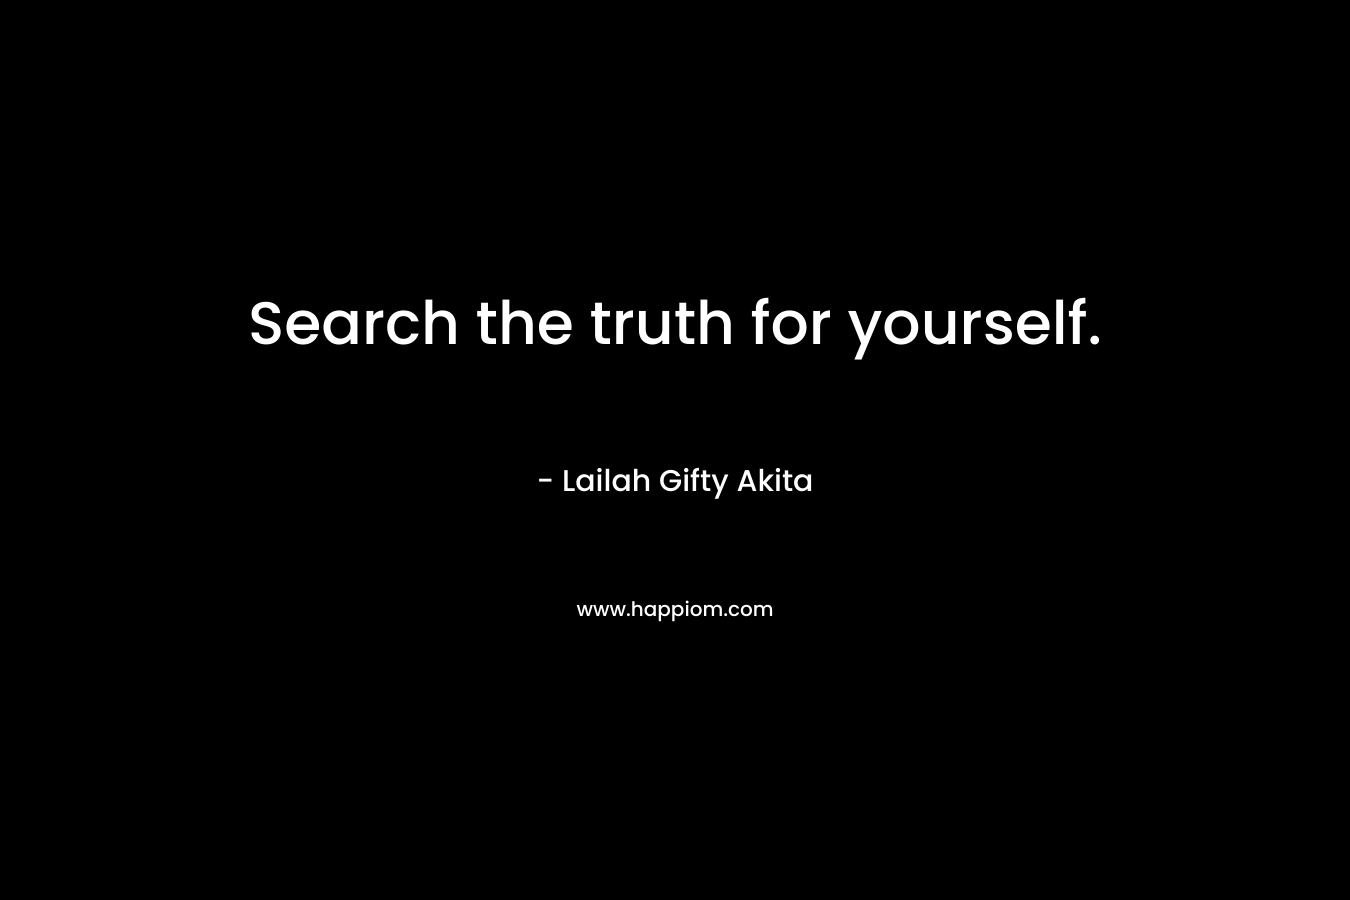 Search the truth for yourself.